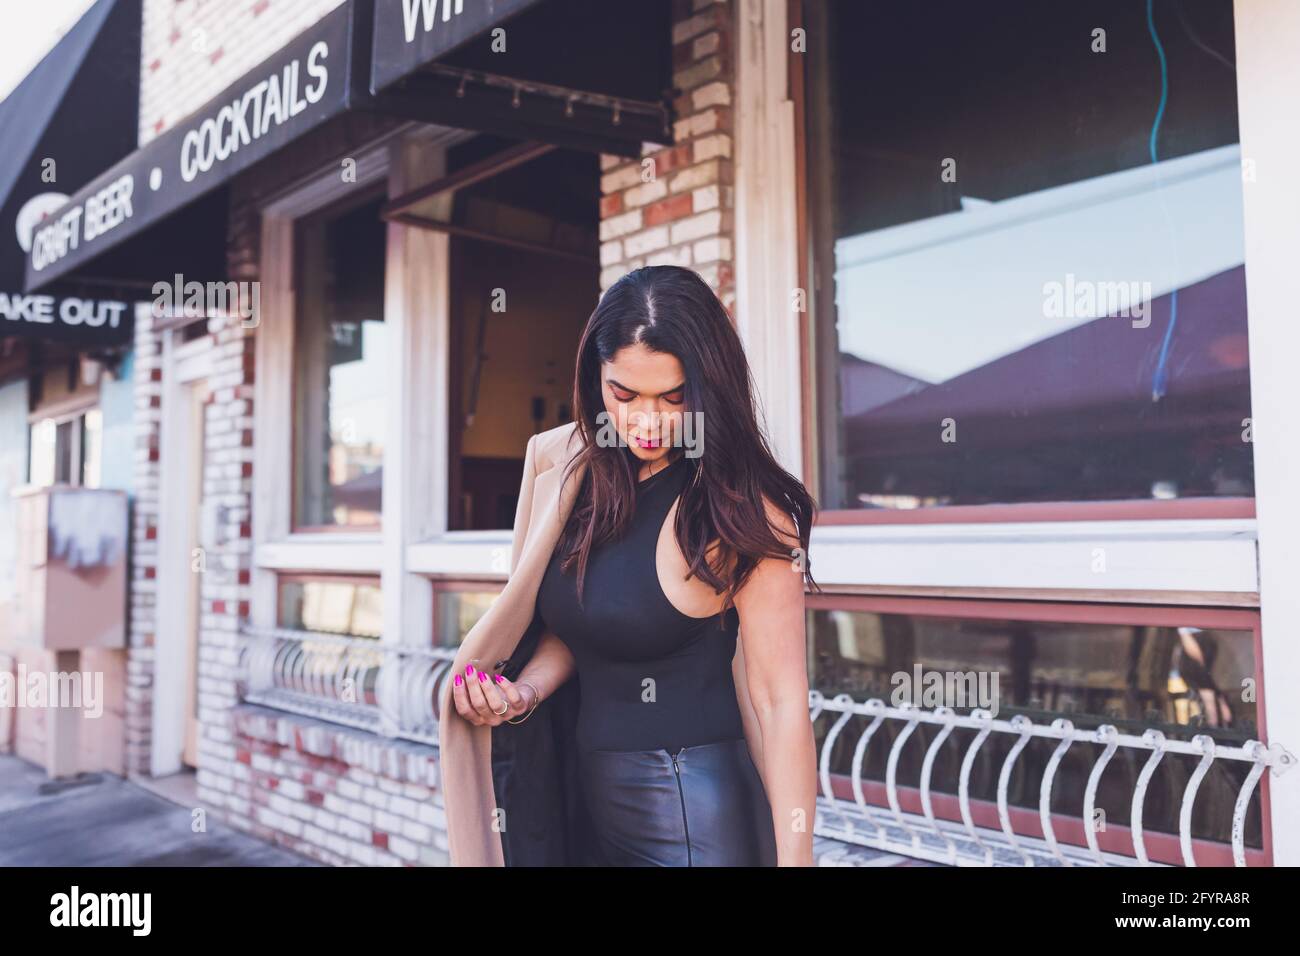 Serious woman walking in front of restaurant with brick walls. Stock Photo